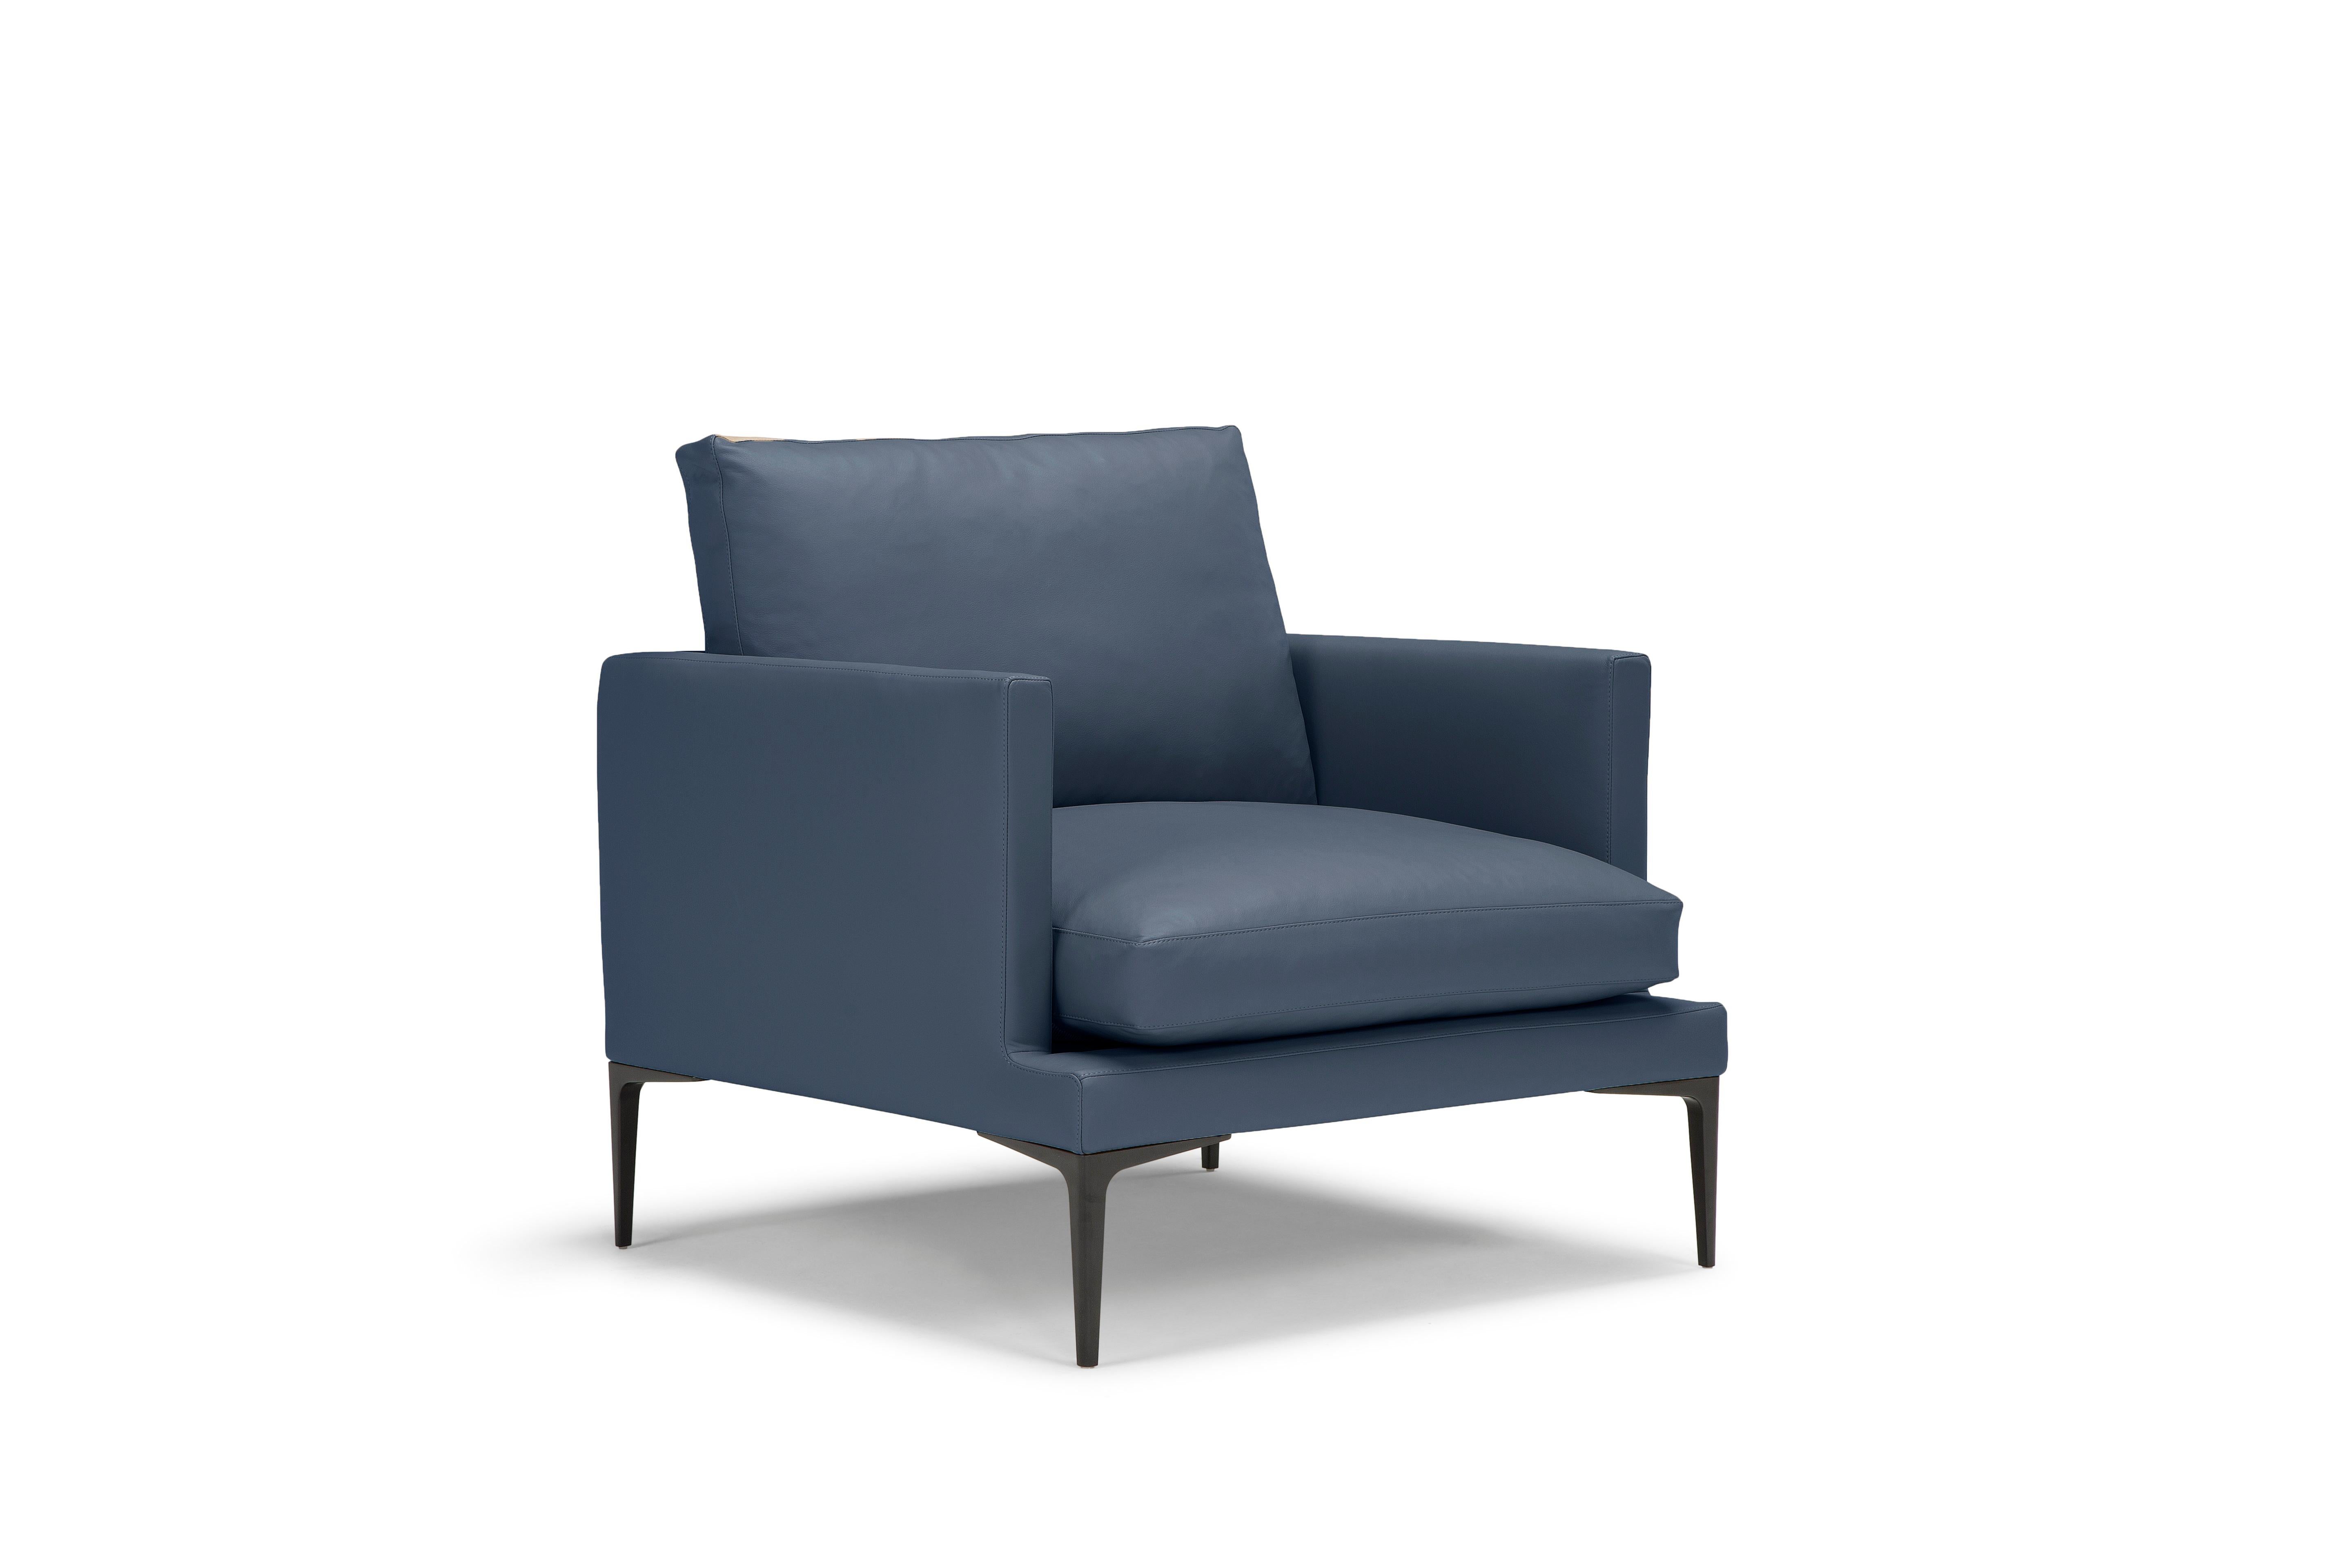 The Segno Sofa has clean and safe lines with a welcoming and comfortable shape. It is rigorous in its lines that alternate angles and curves, to improve the sense of softness and forward the sense of comfort. Greater impact is given by the metal